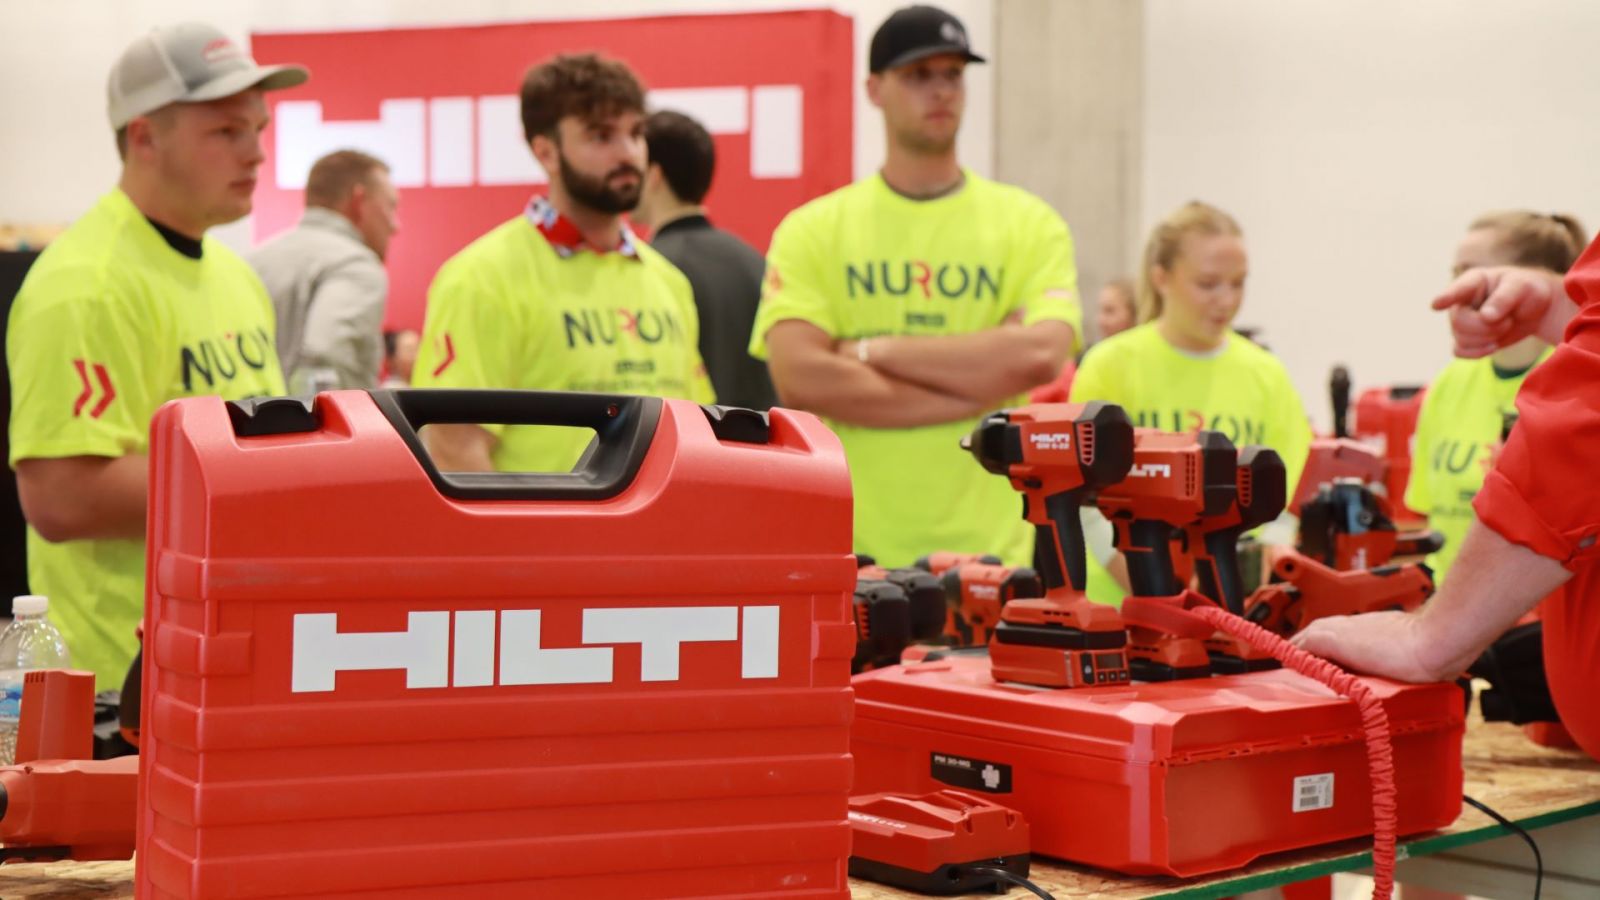 Students in Construction management Technology speak with Hilti employees at the gift event. (Purdue University photo/Zach Rodimel)